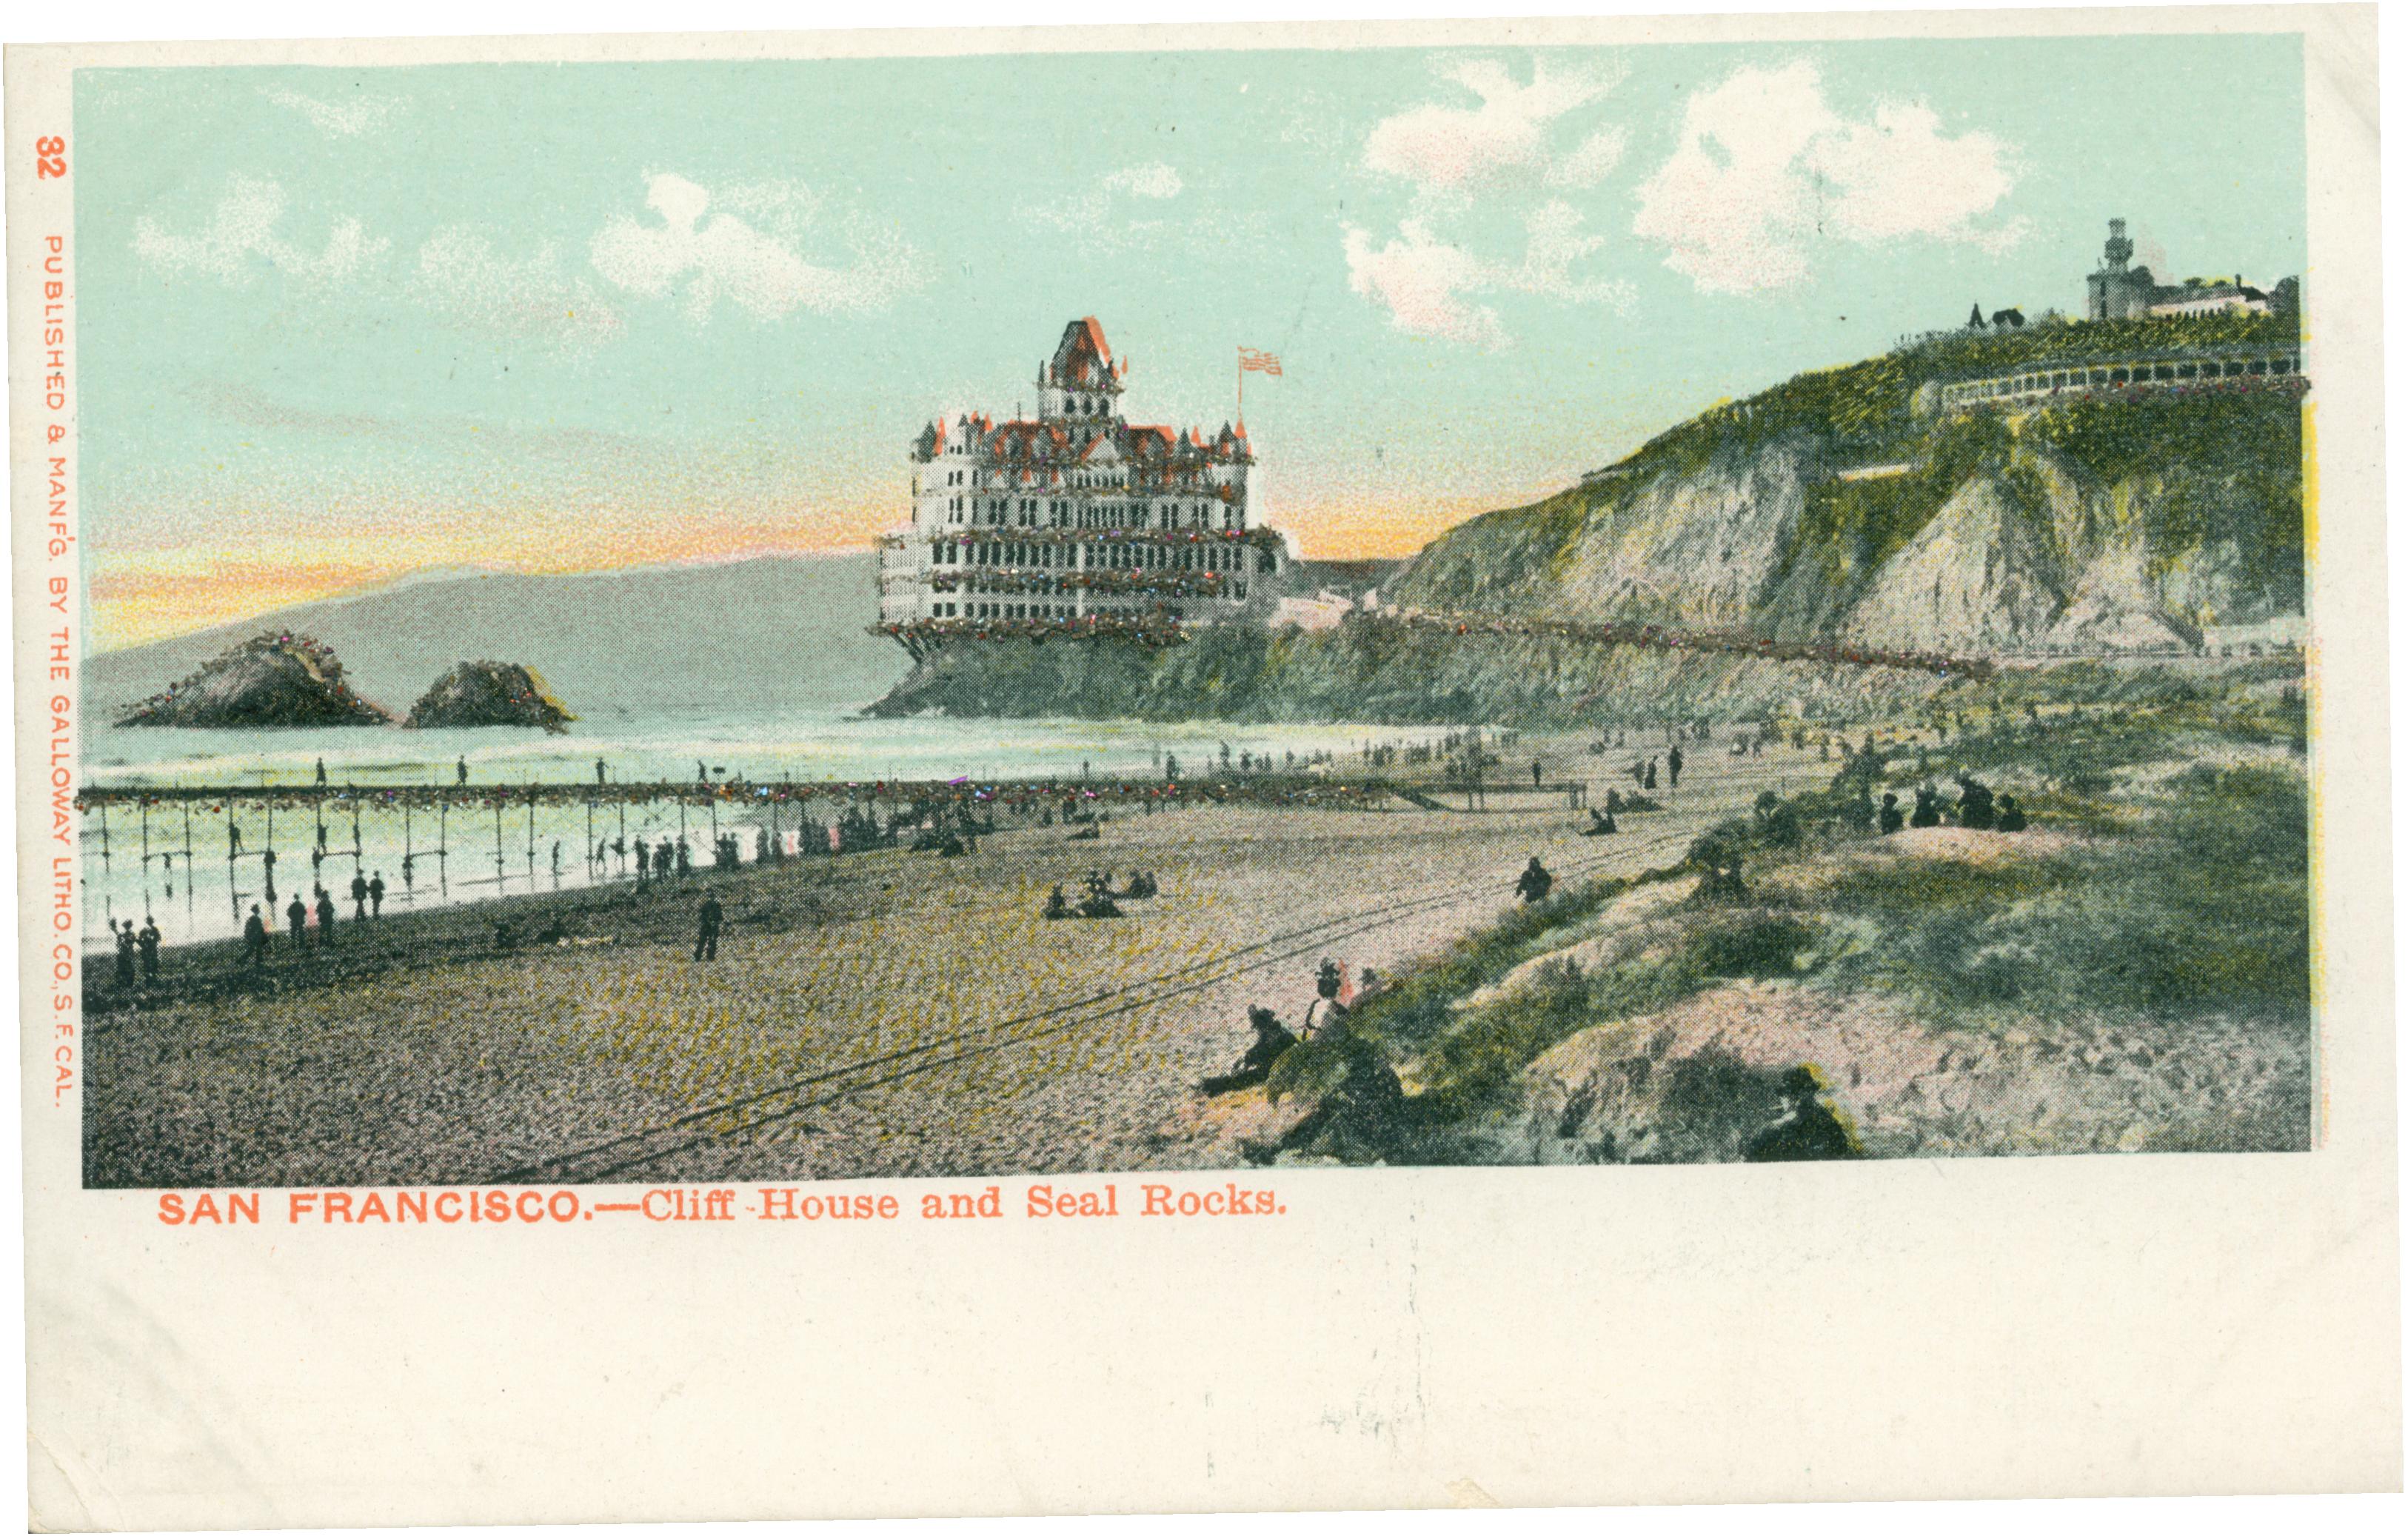 Shows the Cliff House and Seal Rocks, with a jetty and several individuals on the beach in the foreground.